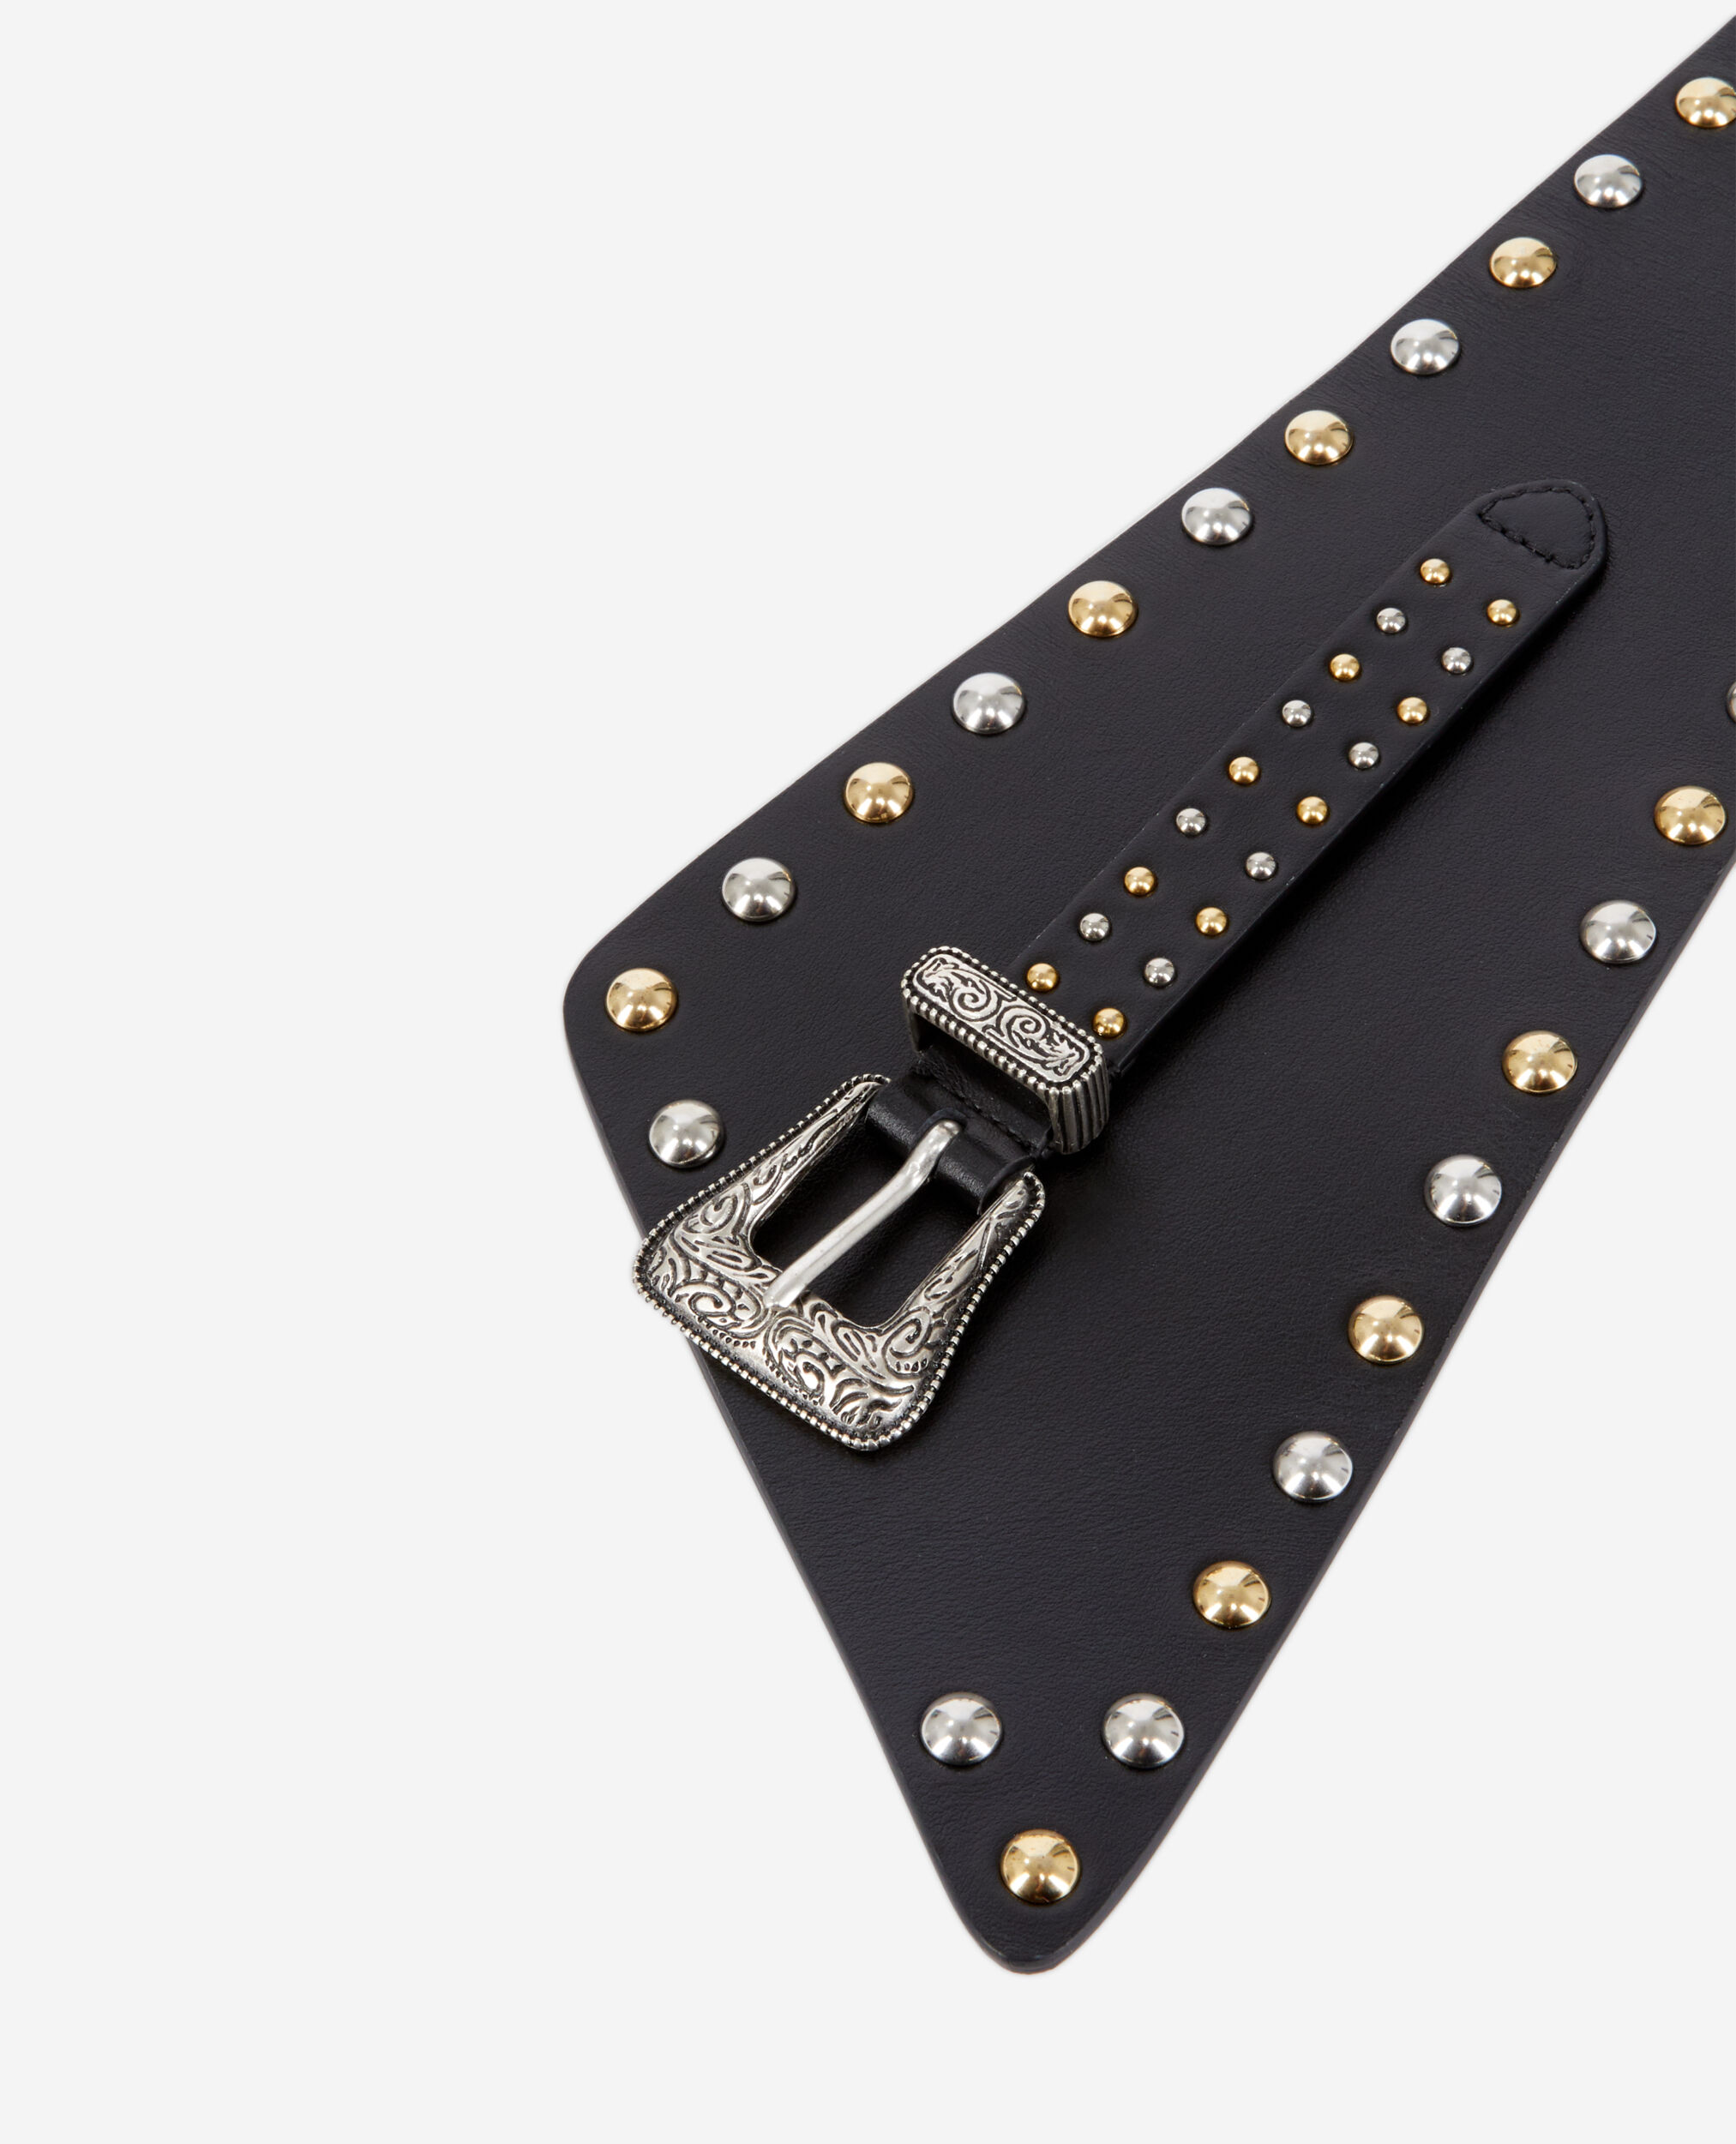 Wide black leather belt with studs and Western buckle, BLACK, hi-res image number null